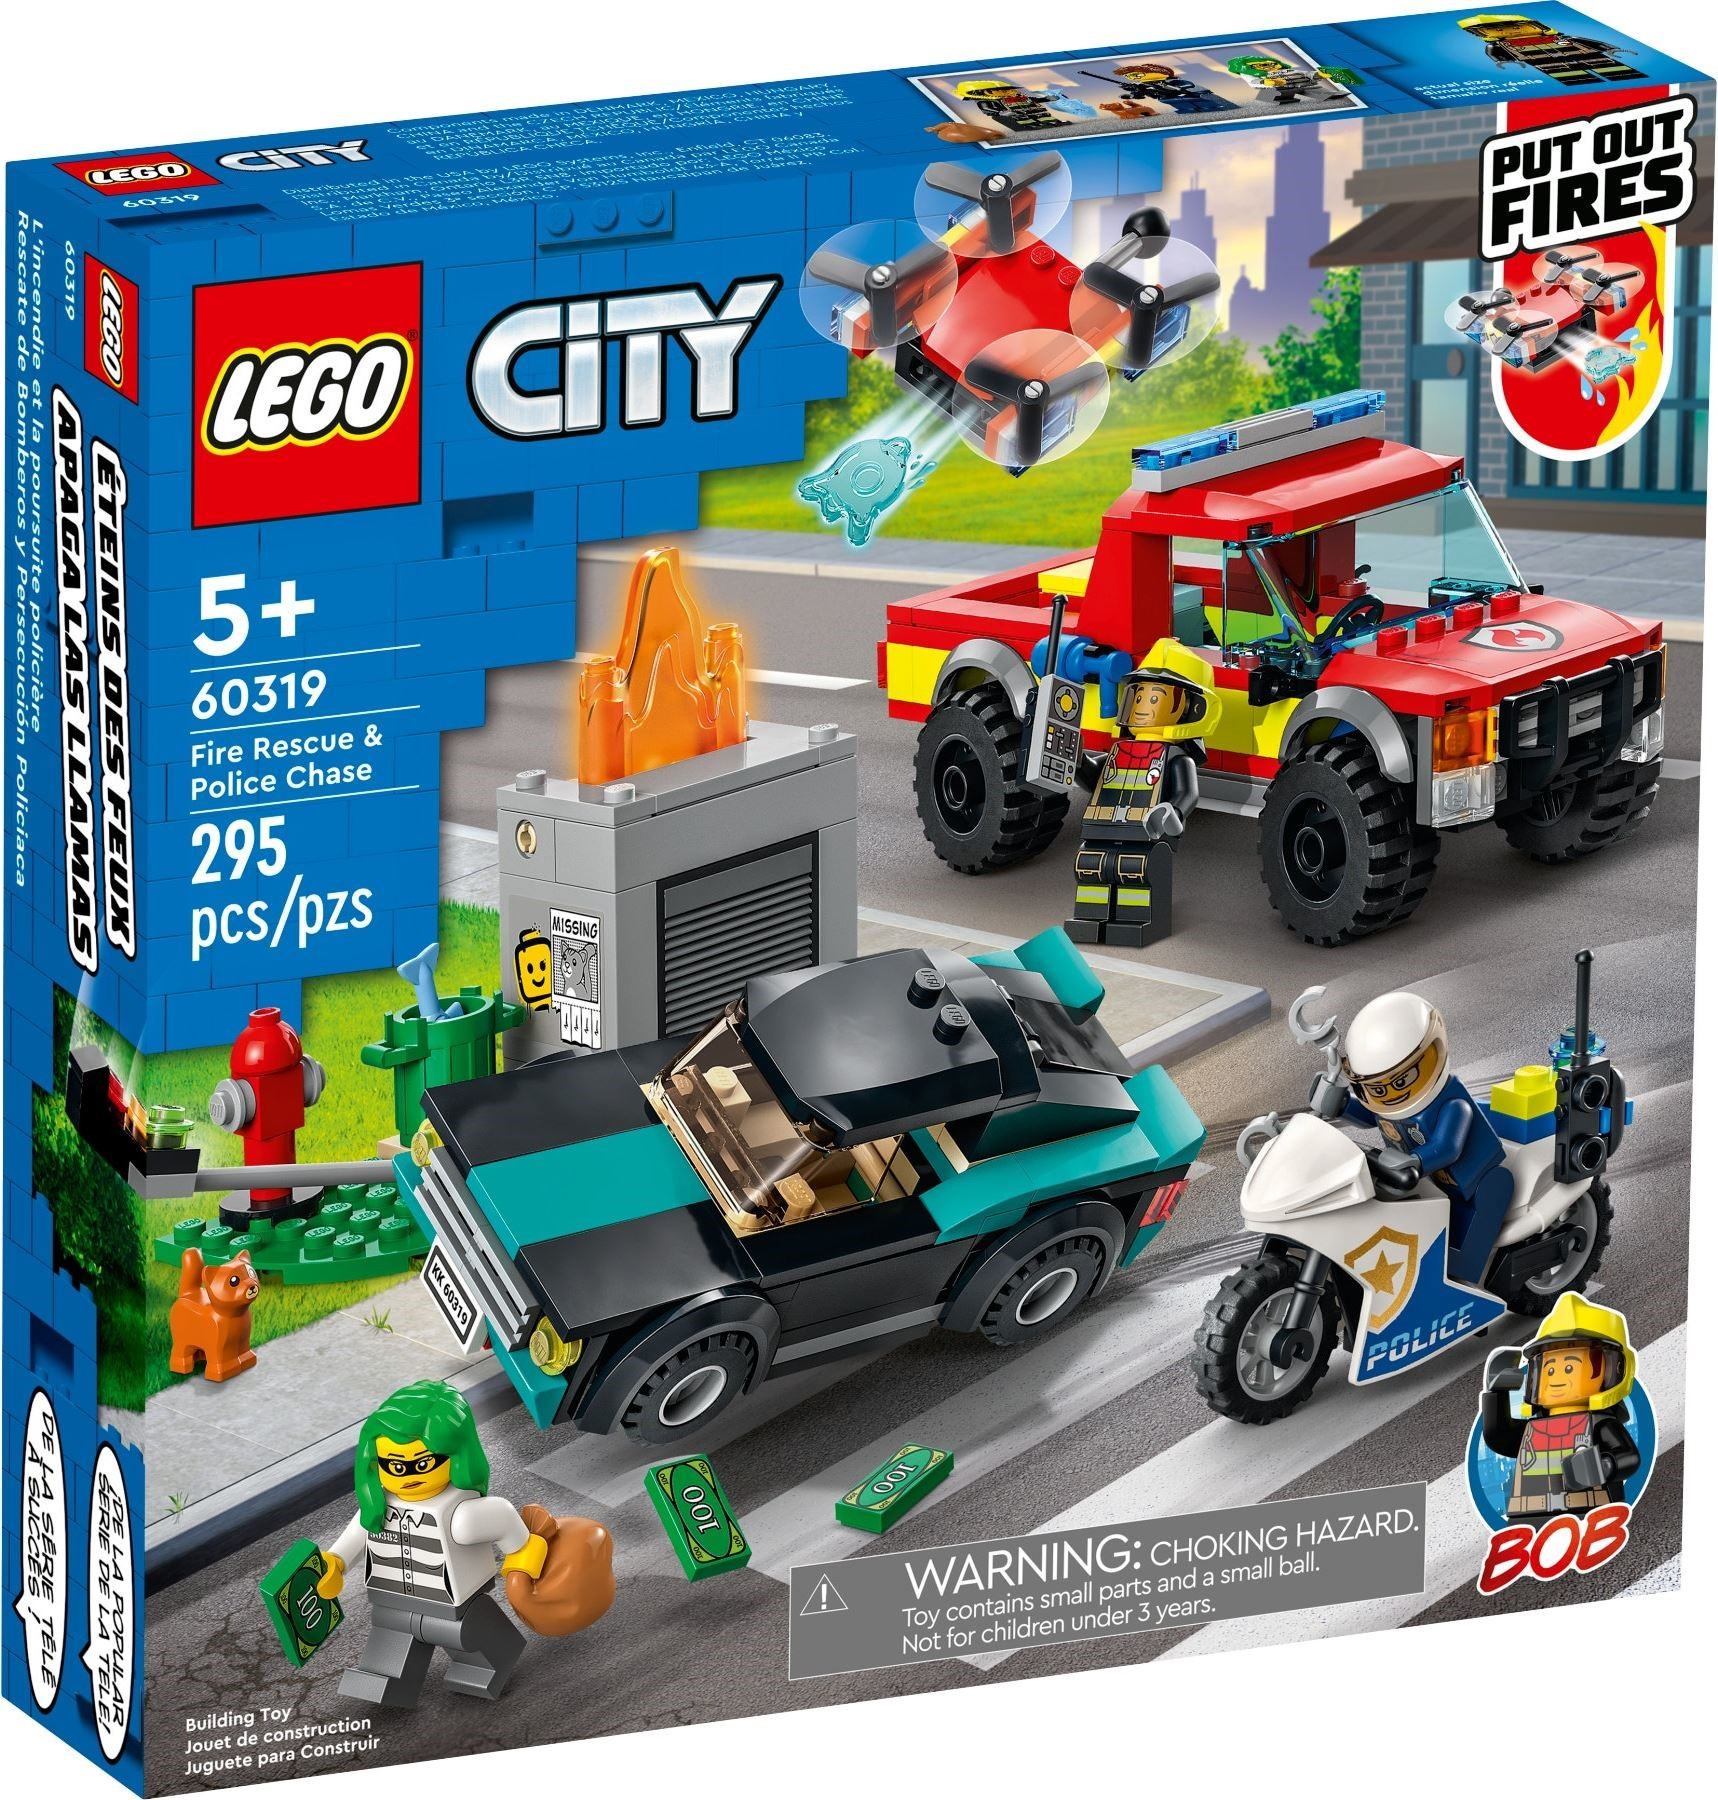 60319 Fire Rescue & Police Chase | Lego City Adventures Wiki | Fandom